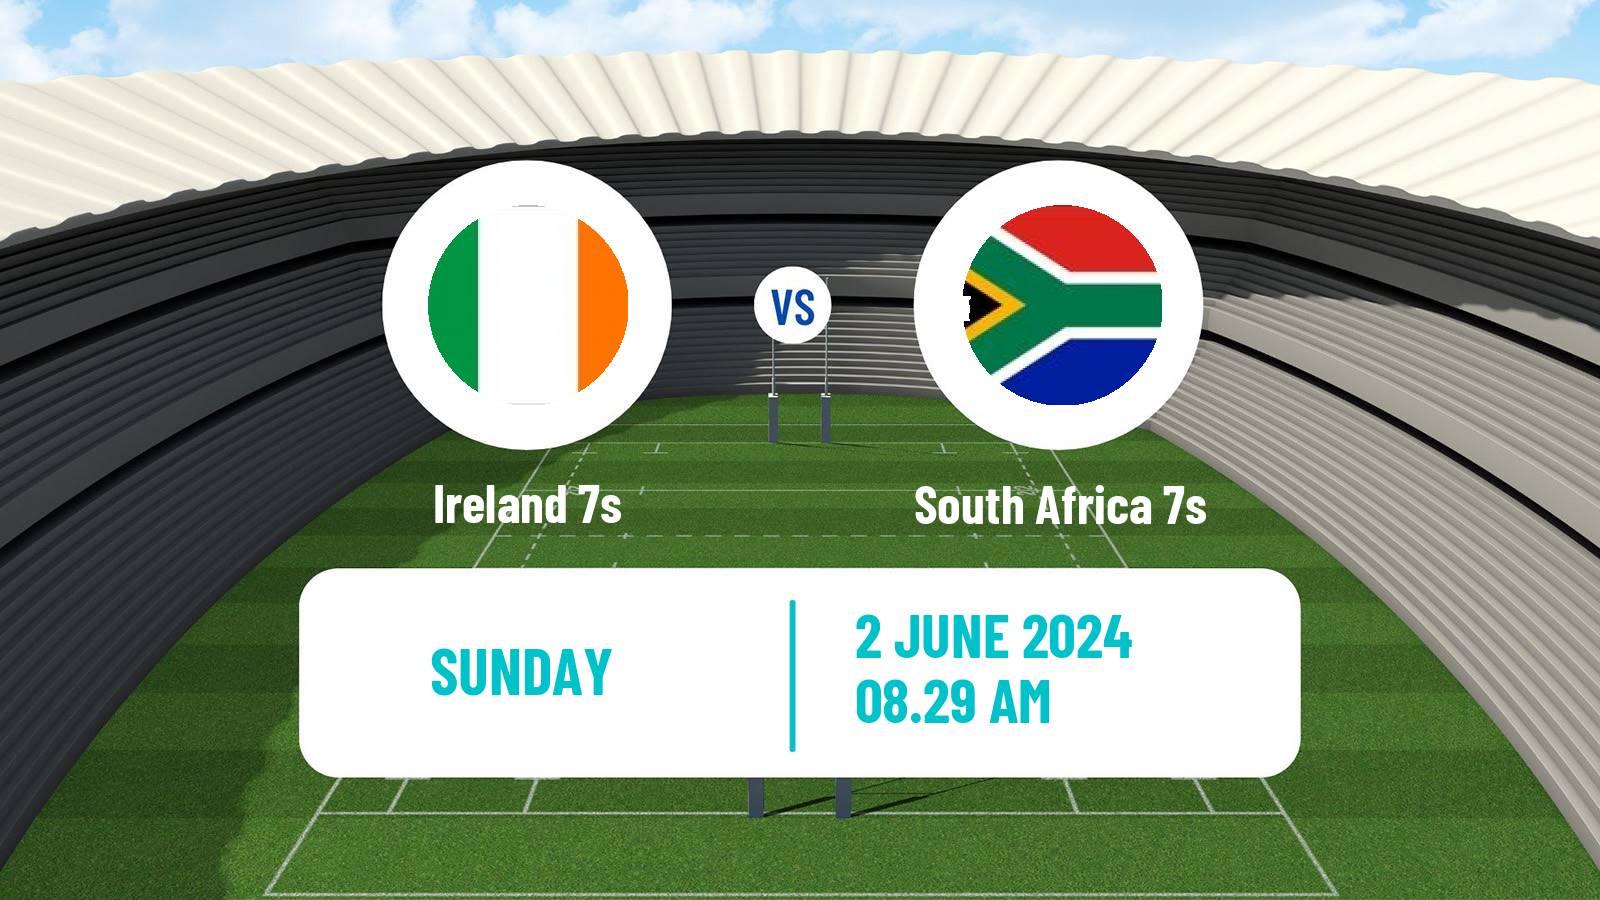 Rugby union Sevens World Series - Spain Ireland 7s - South Africa 7s